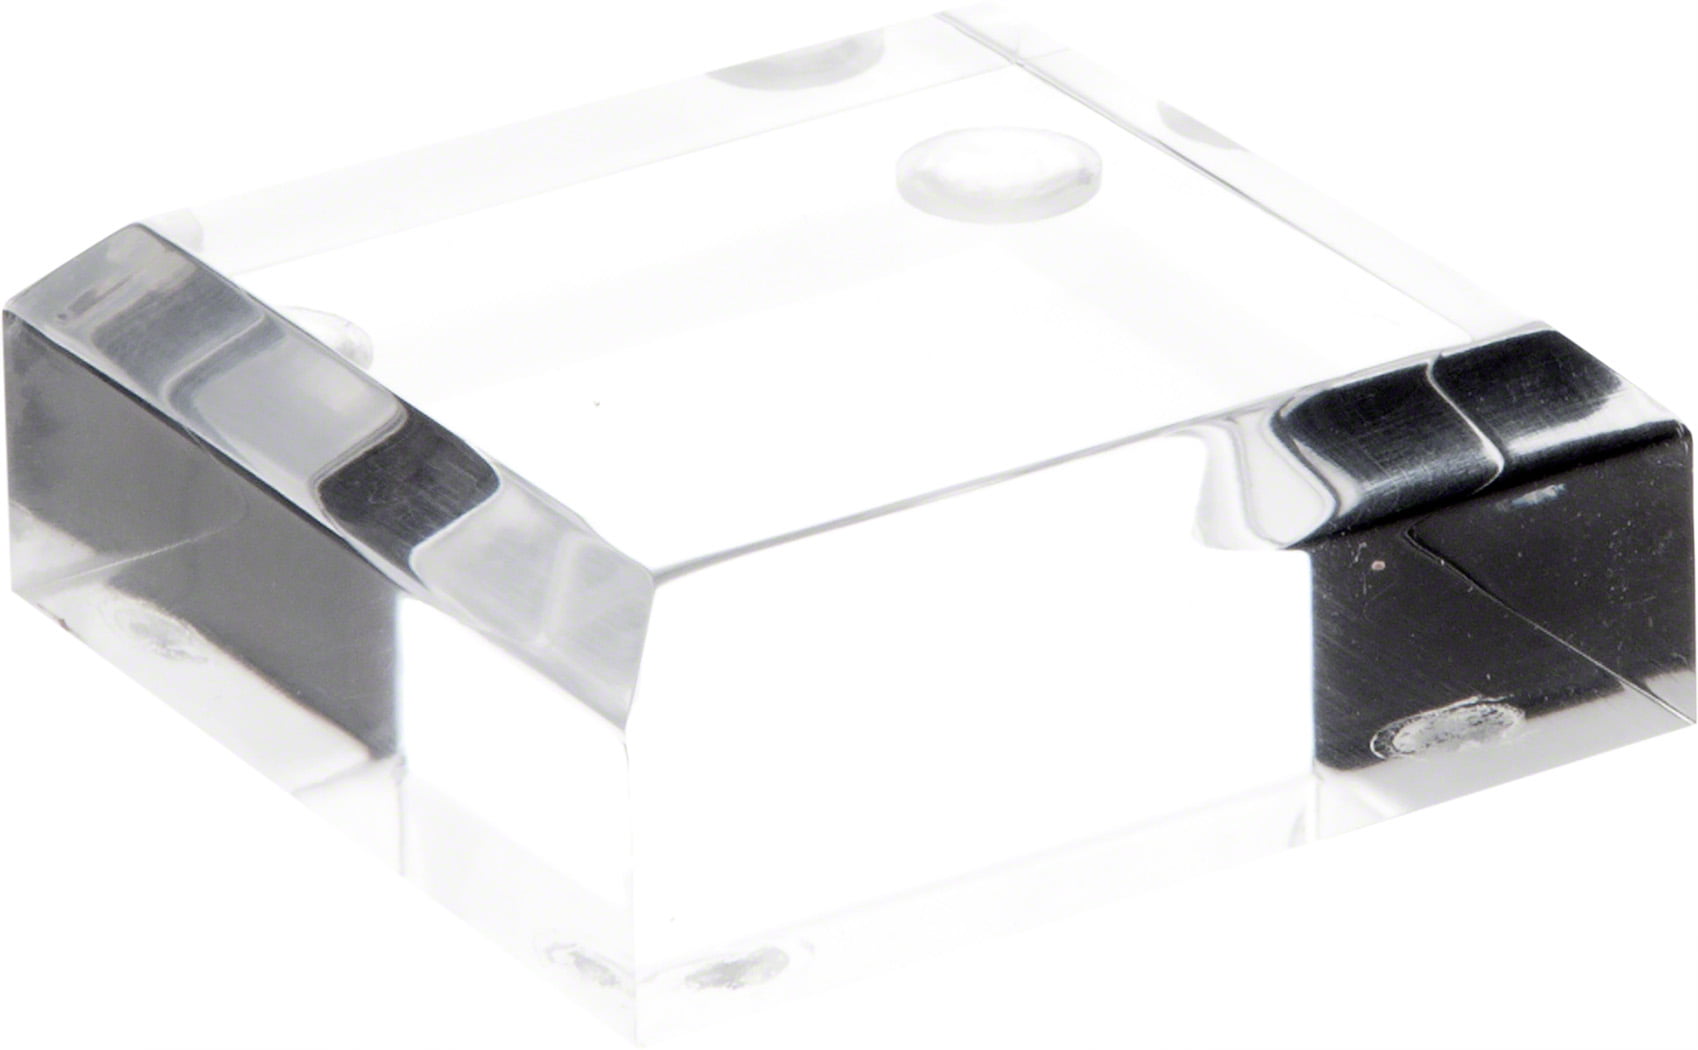 Plymor Black Acrylic Square Beveled Display Base Pack of 2 2 W x 2 D x 0.75 H